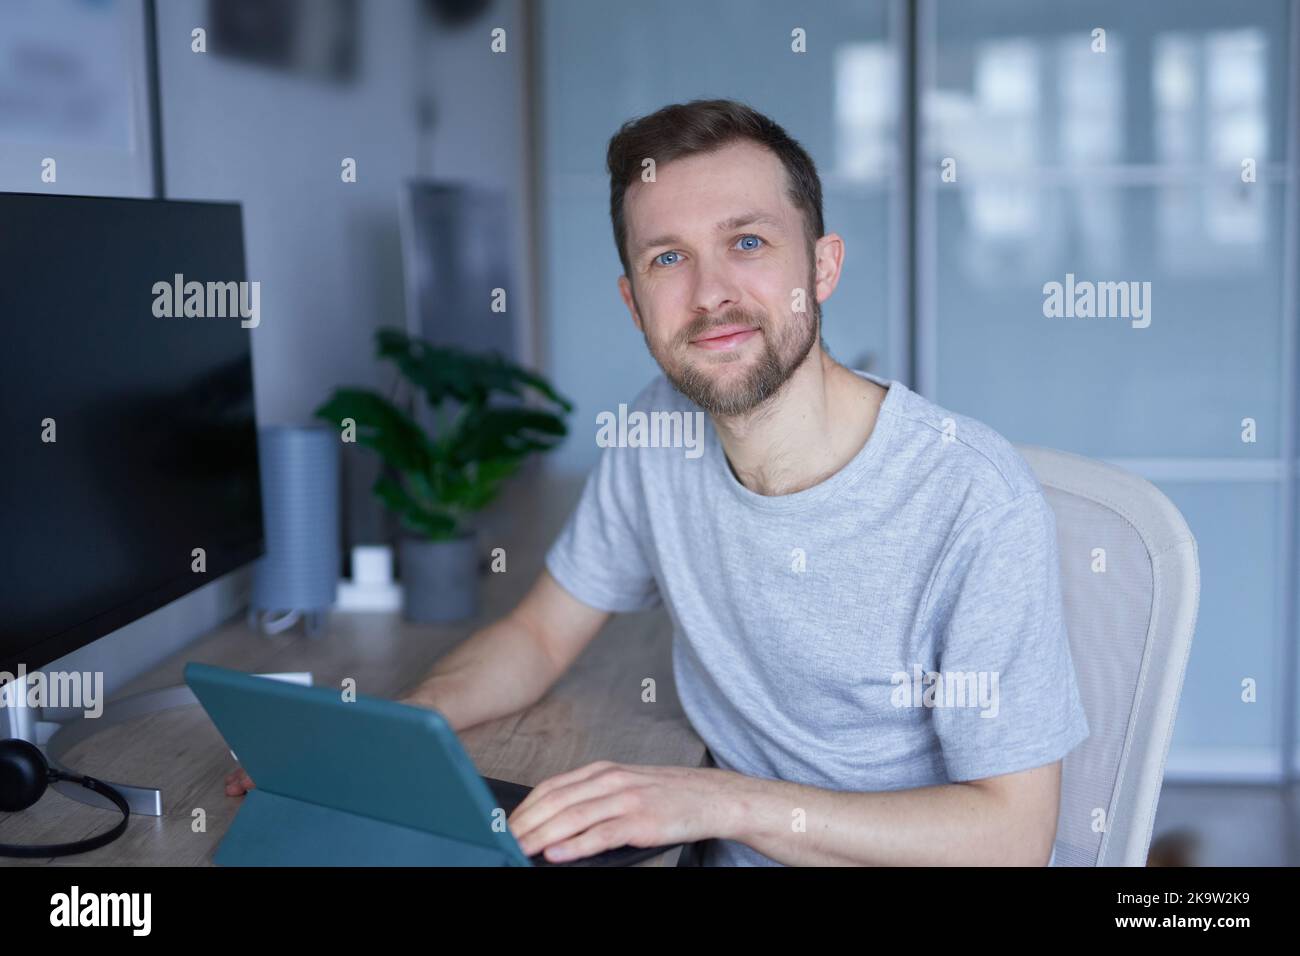 Smart tech concept. Attractive bearded male sitting in home office using tablet. Close-up of portrait of young handsome man in grey shirt and looking in camera, positive emotion. High quality photo Stock Photo